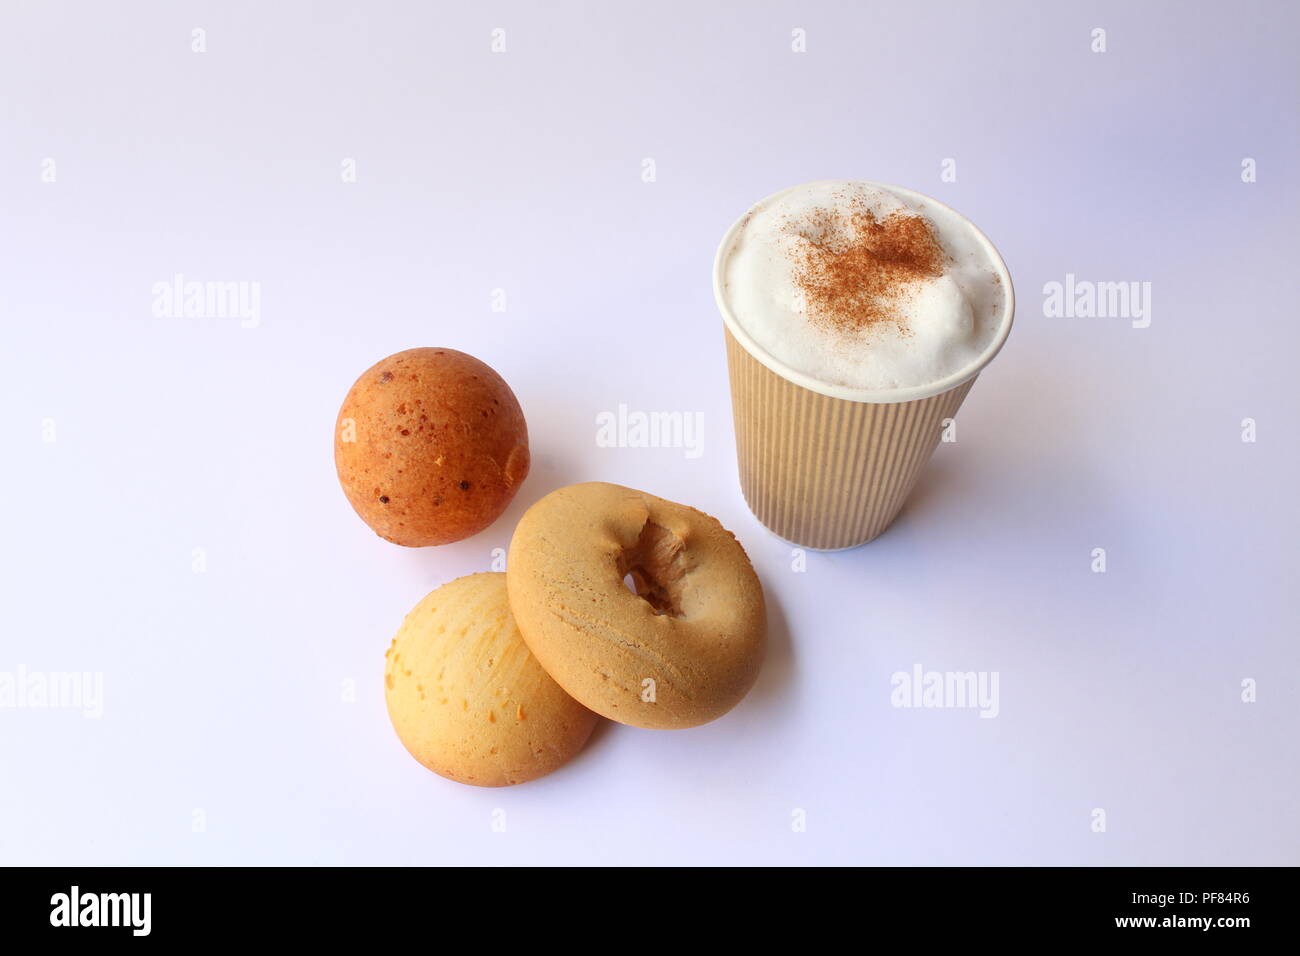 Take away capuccino coffee with some traditional colombian pastries, usually served for breakfast. Almojabana, buñuelo and pandebono. Stock Photo